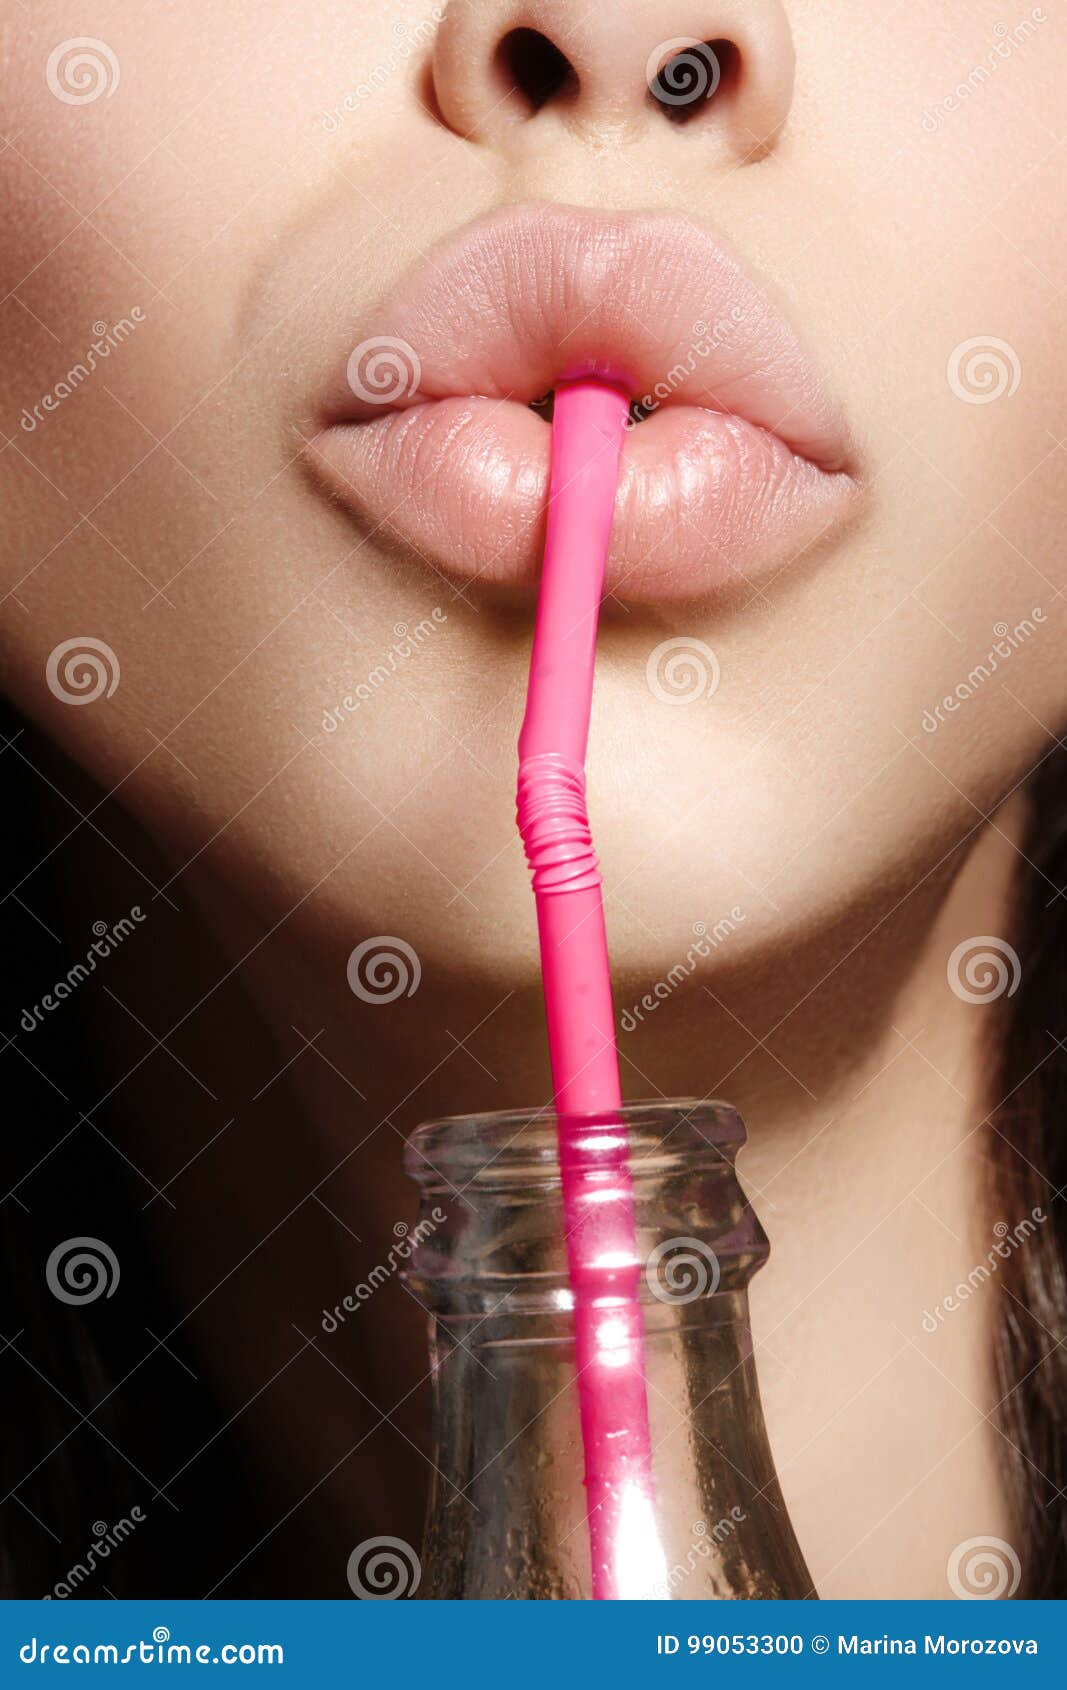 https://thumbs.dreamstime.com/z/glamour-closeup-woman-s-lips-drinking-pink-straw-natural-makeup-fashion-summer-look-bottle-water-full-lip-cute-healthy-99053300.jpg